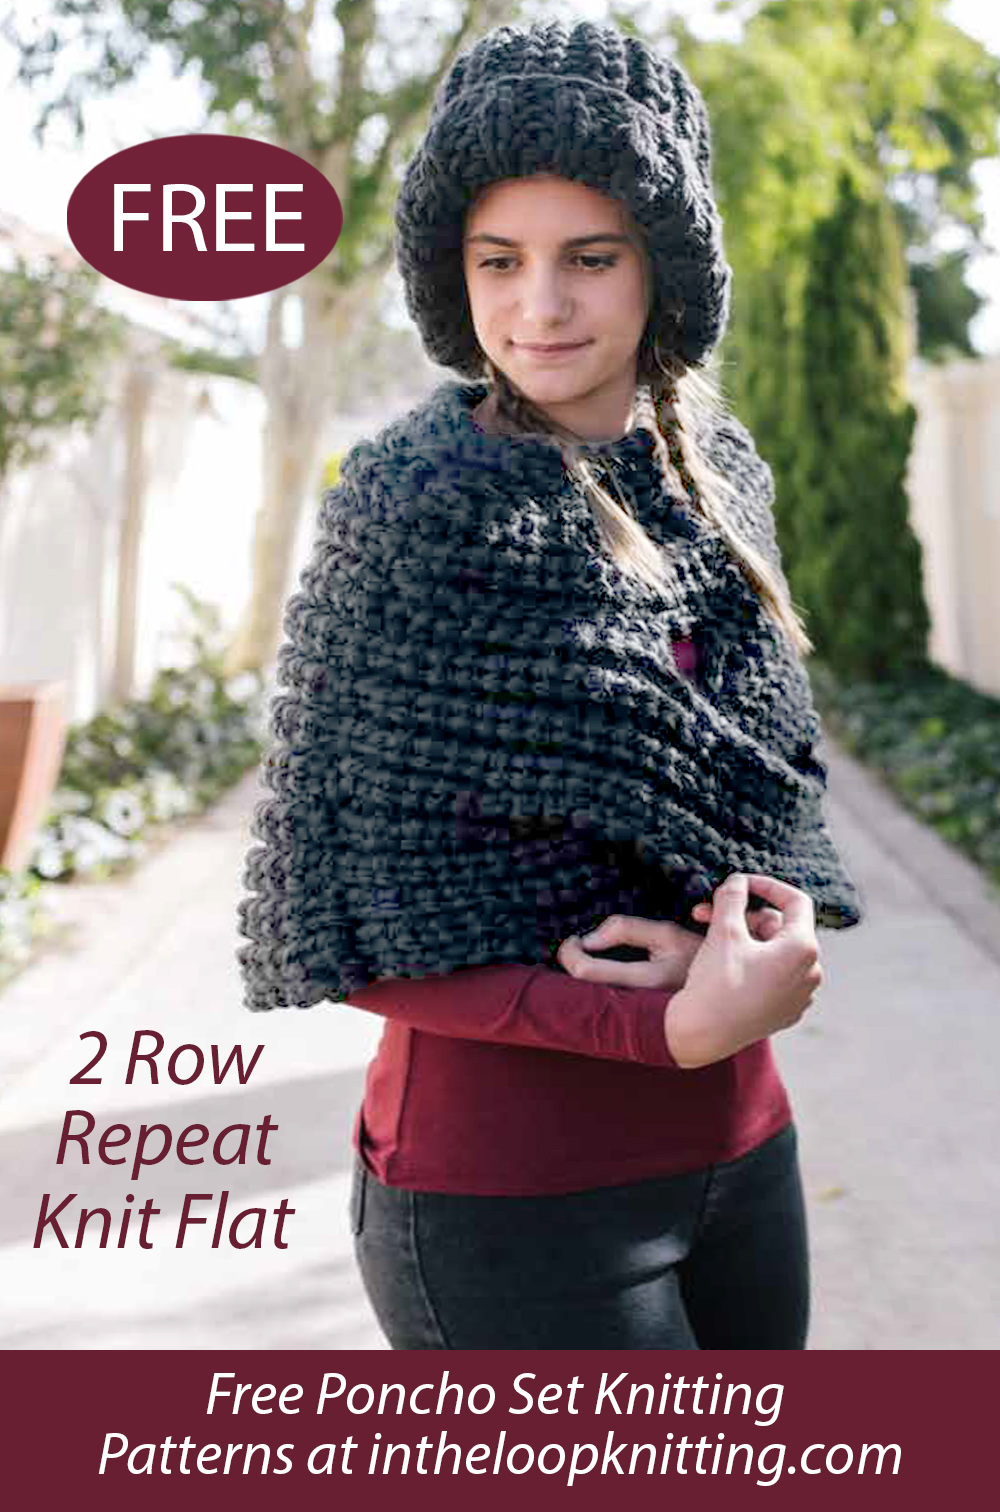 Free Fishermans Rib Shoulder Cover and Beanie Knitting Pattern Elle 0013C